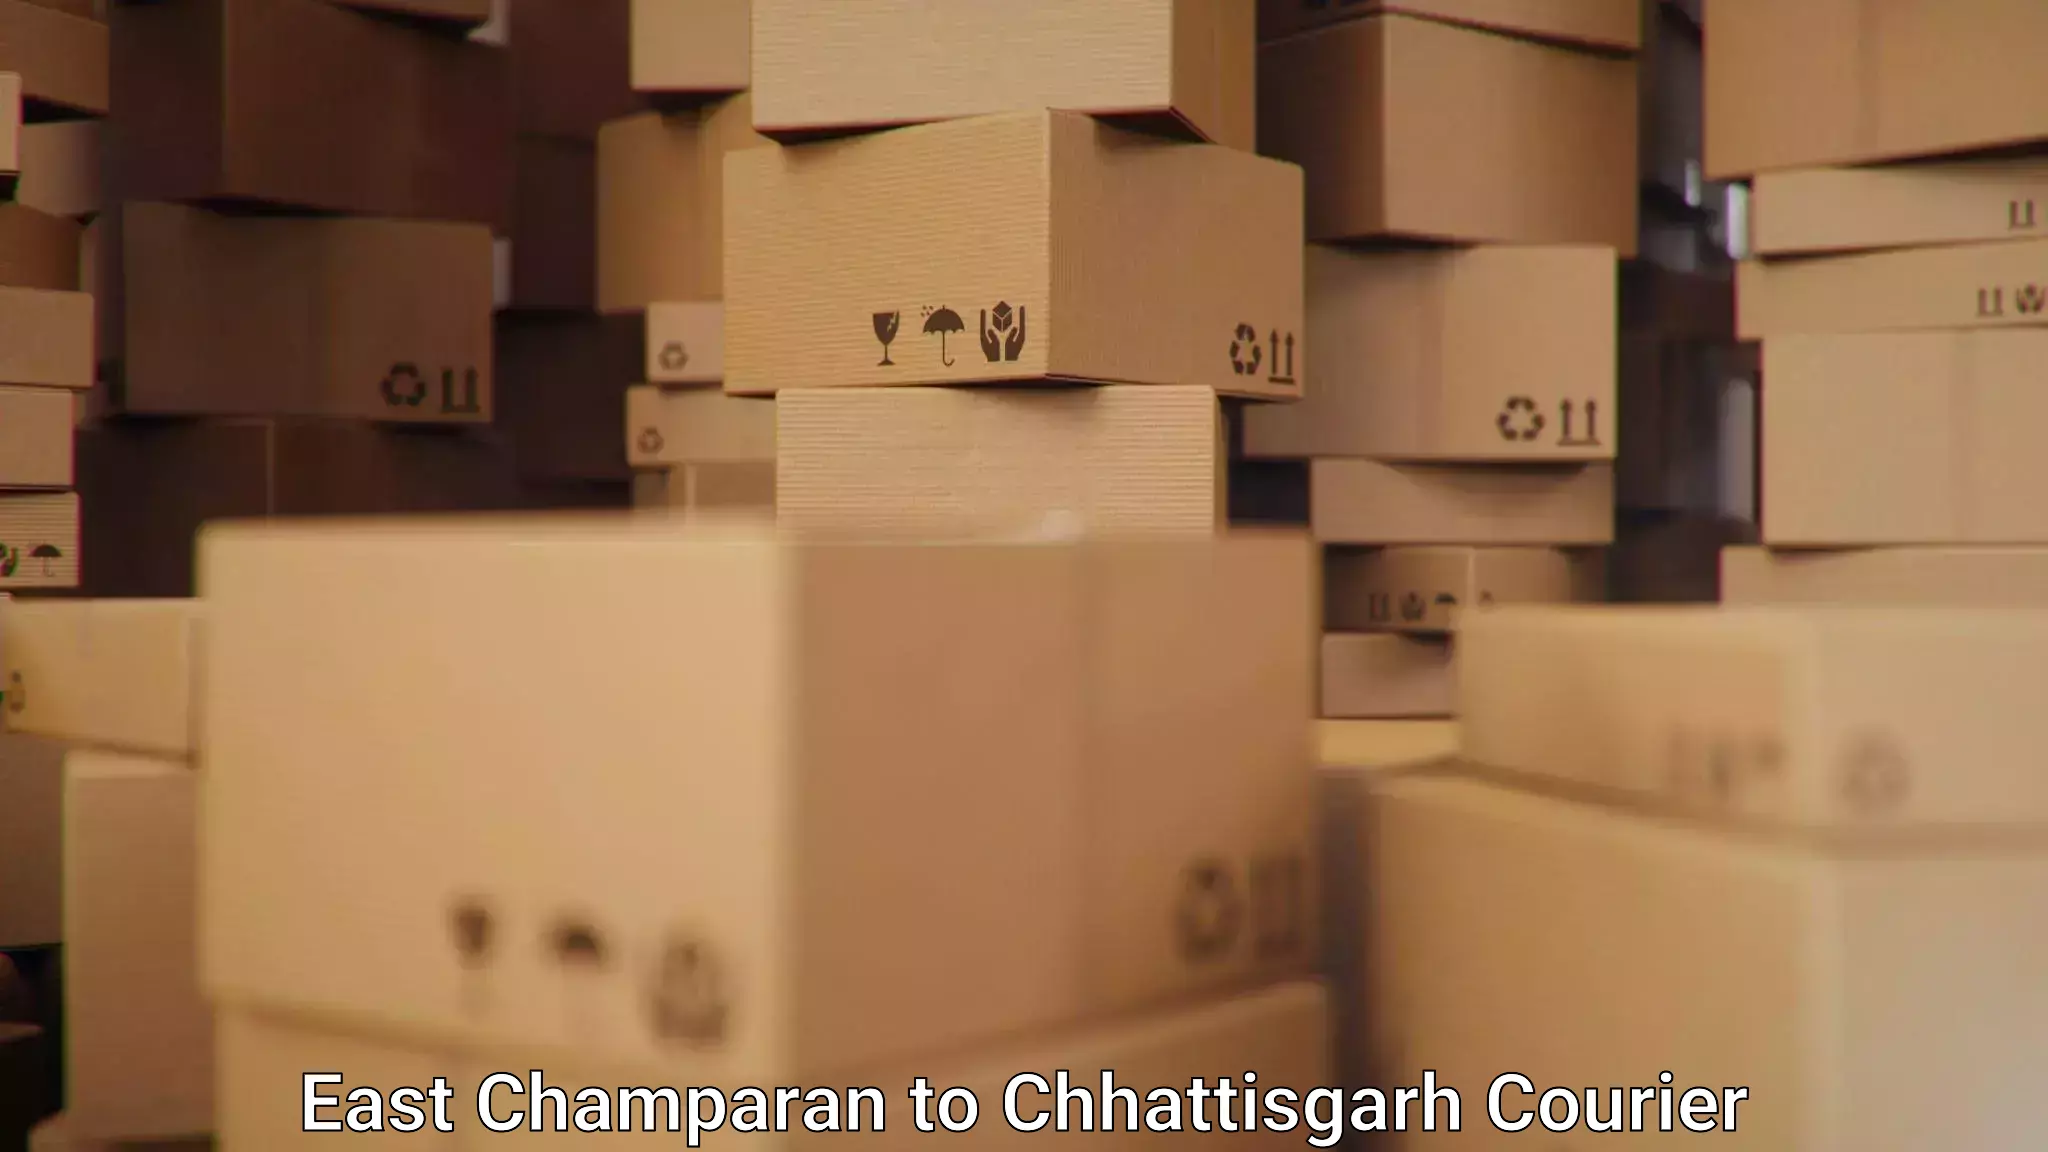 Holiday shipping services East Champaran to Chhattisgarh